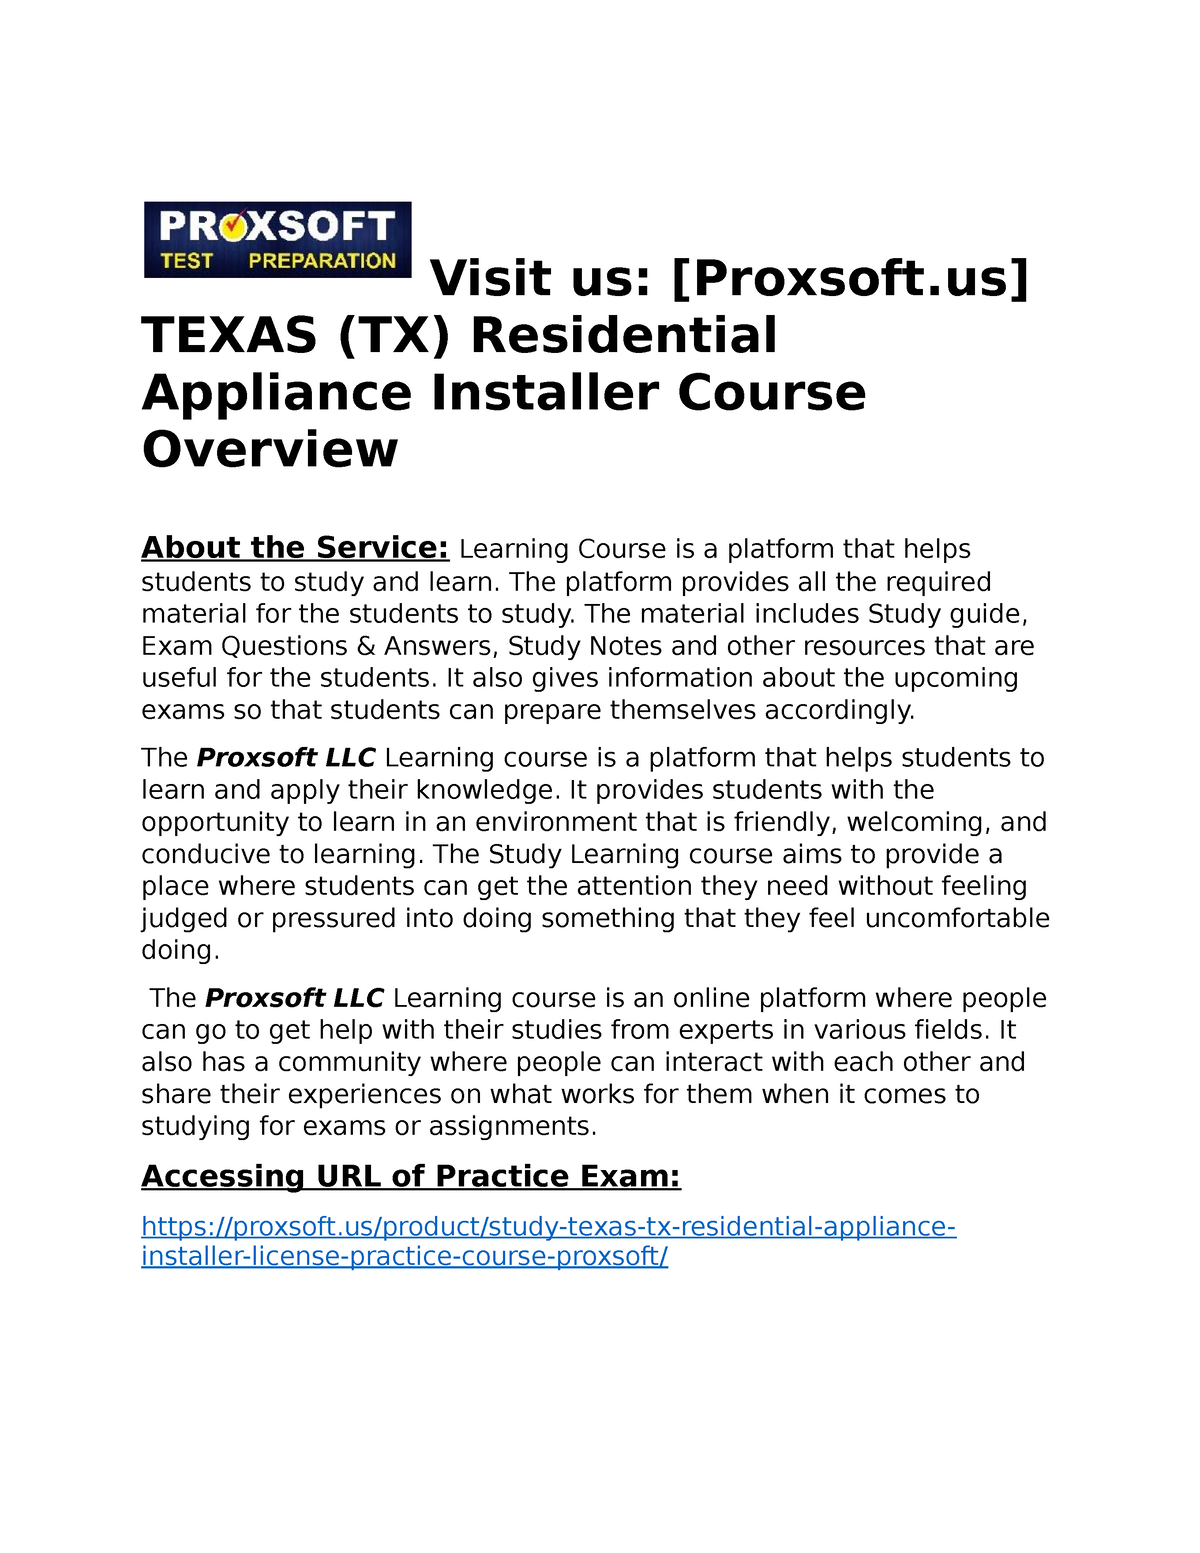 Arizona residential appliance installer license prep class for windows download free